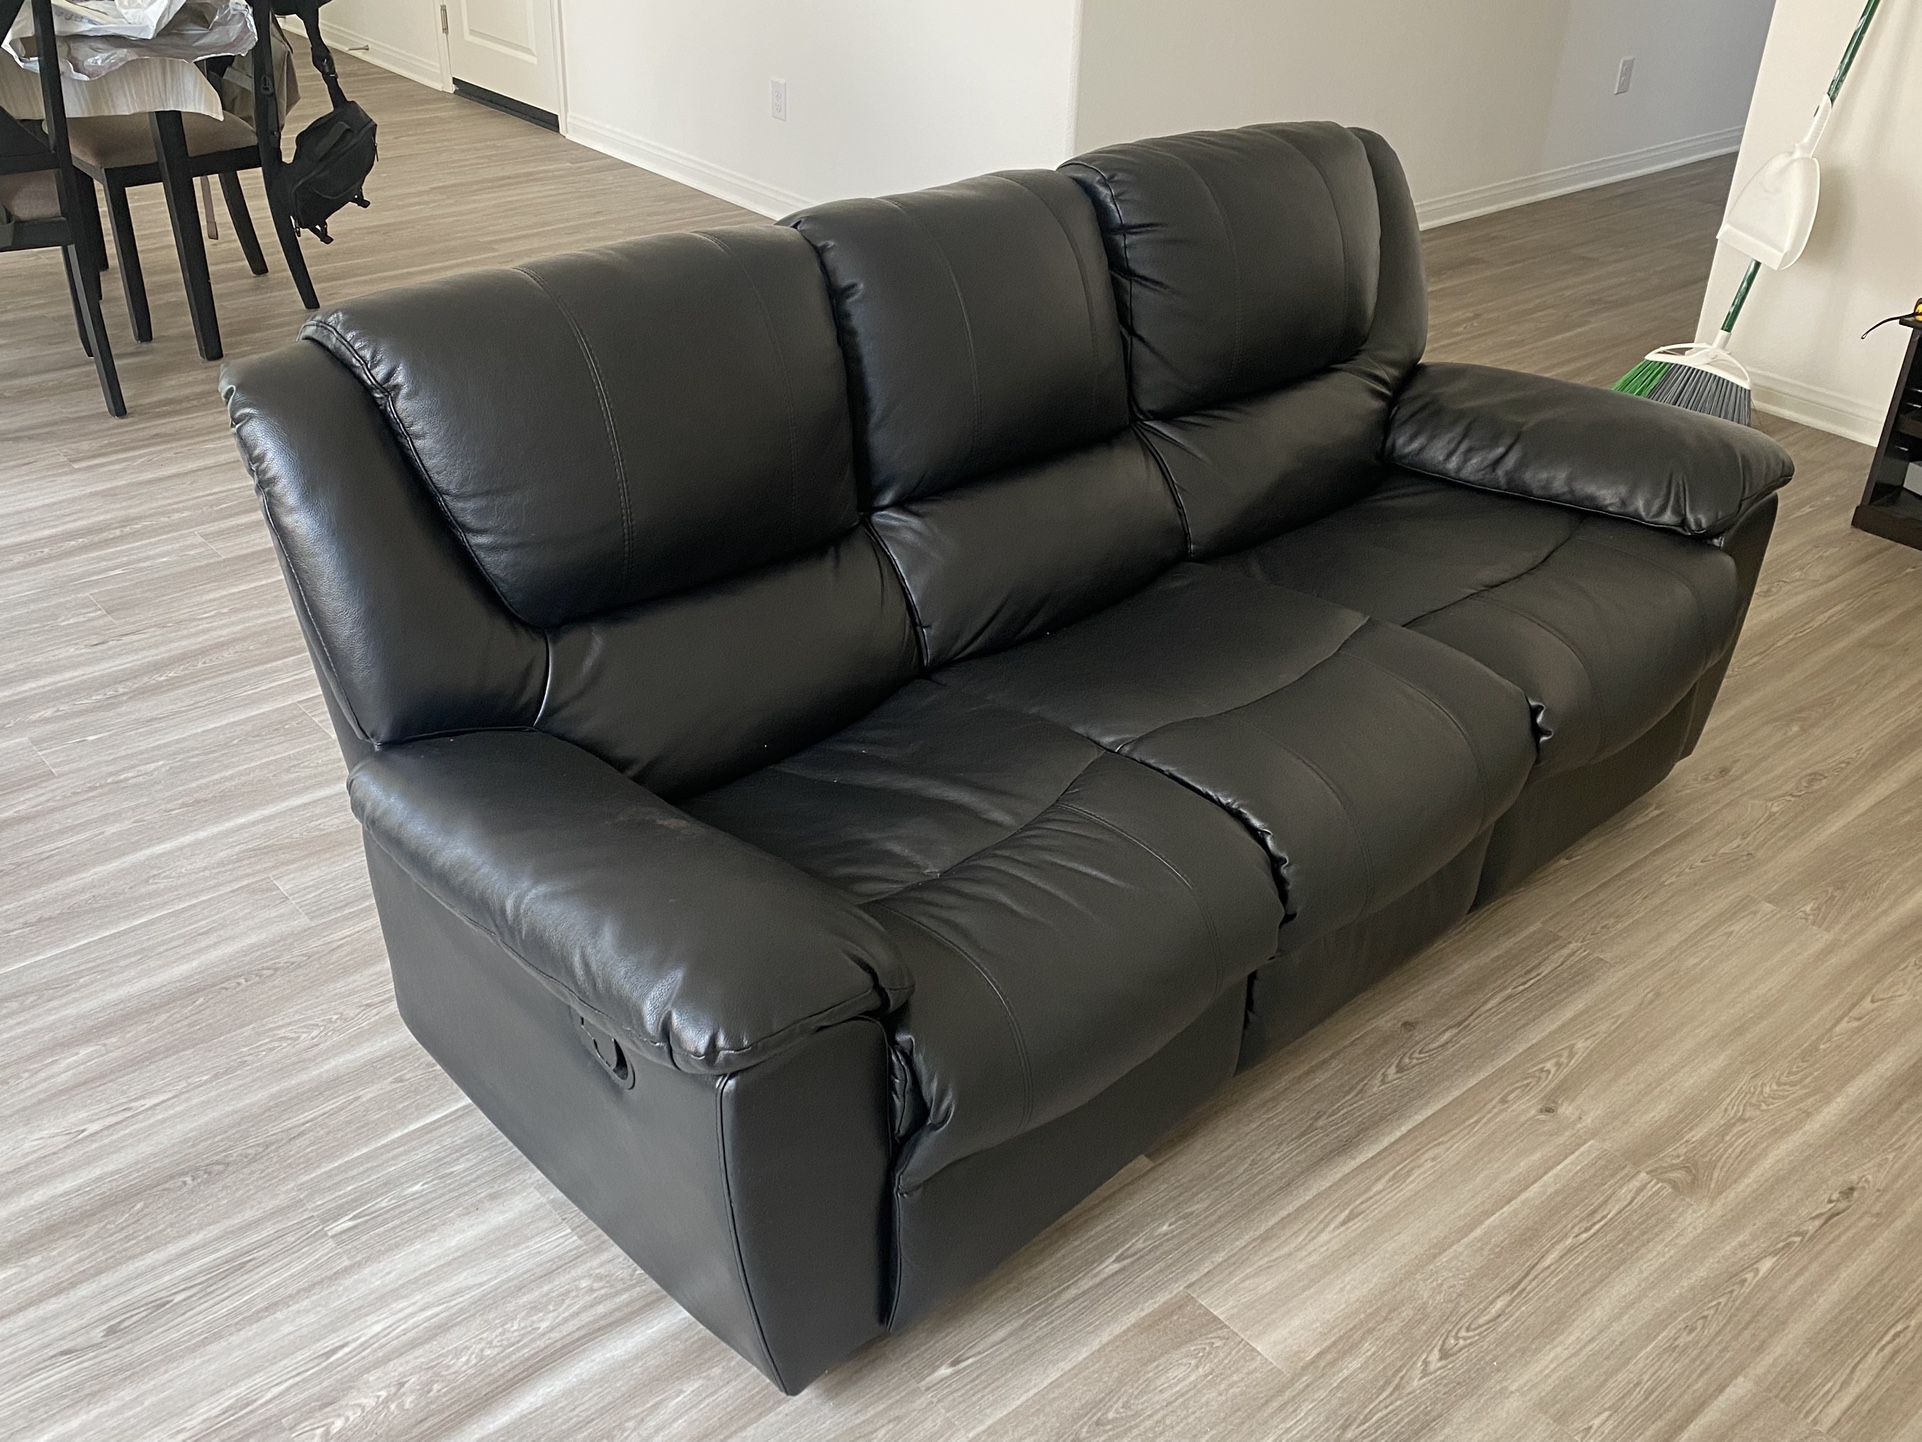 3 Seater Black Leather Recliner 